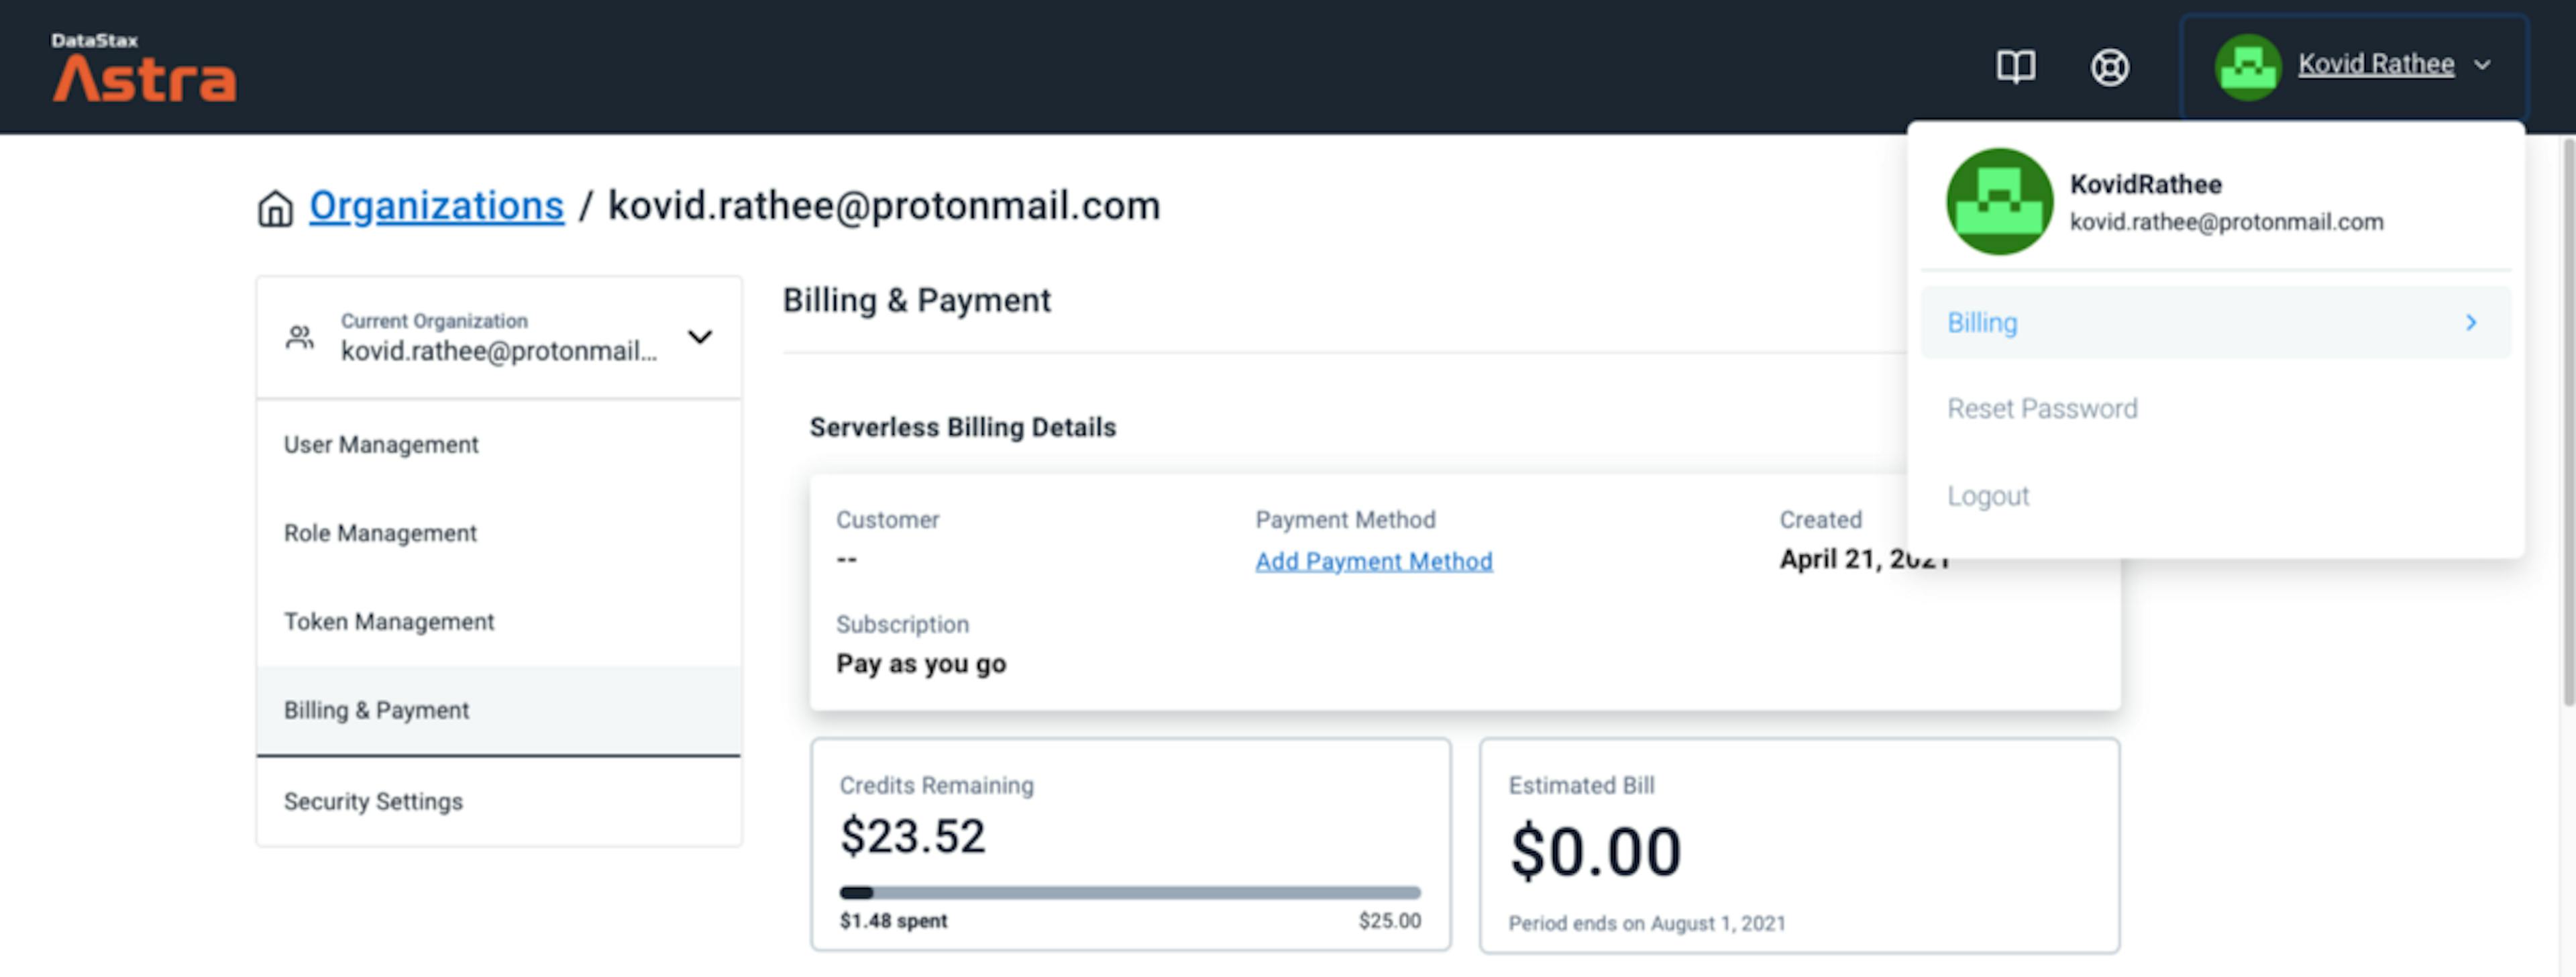 Billing & Payments page for DataStax Astra.